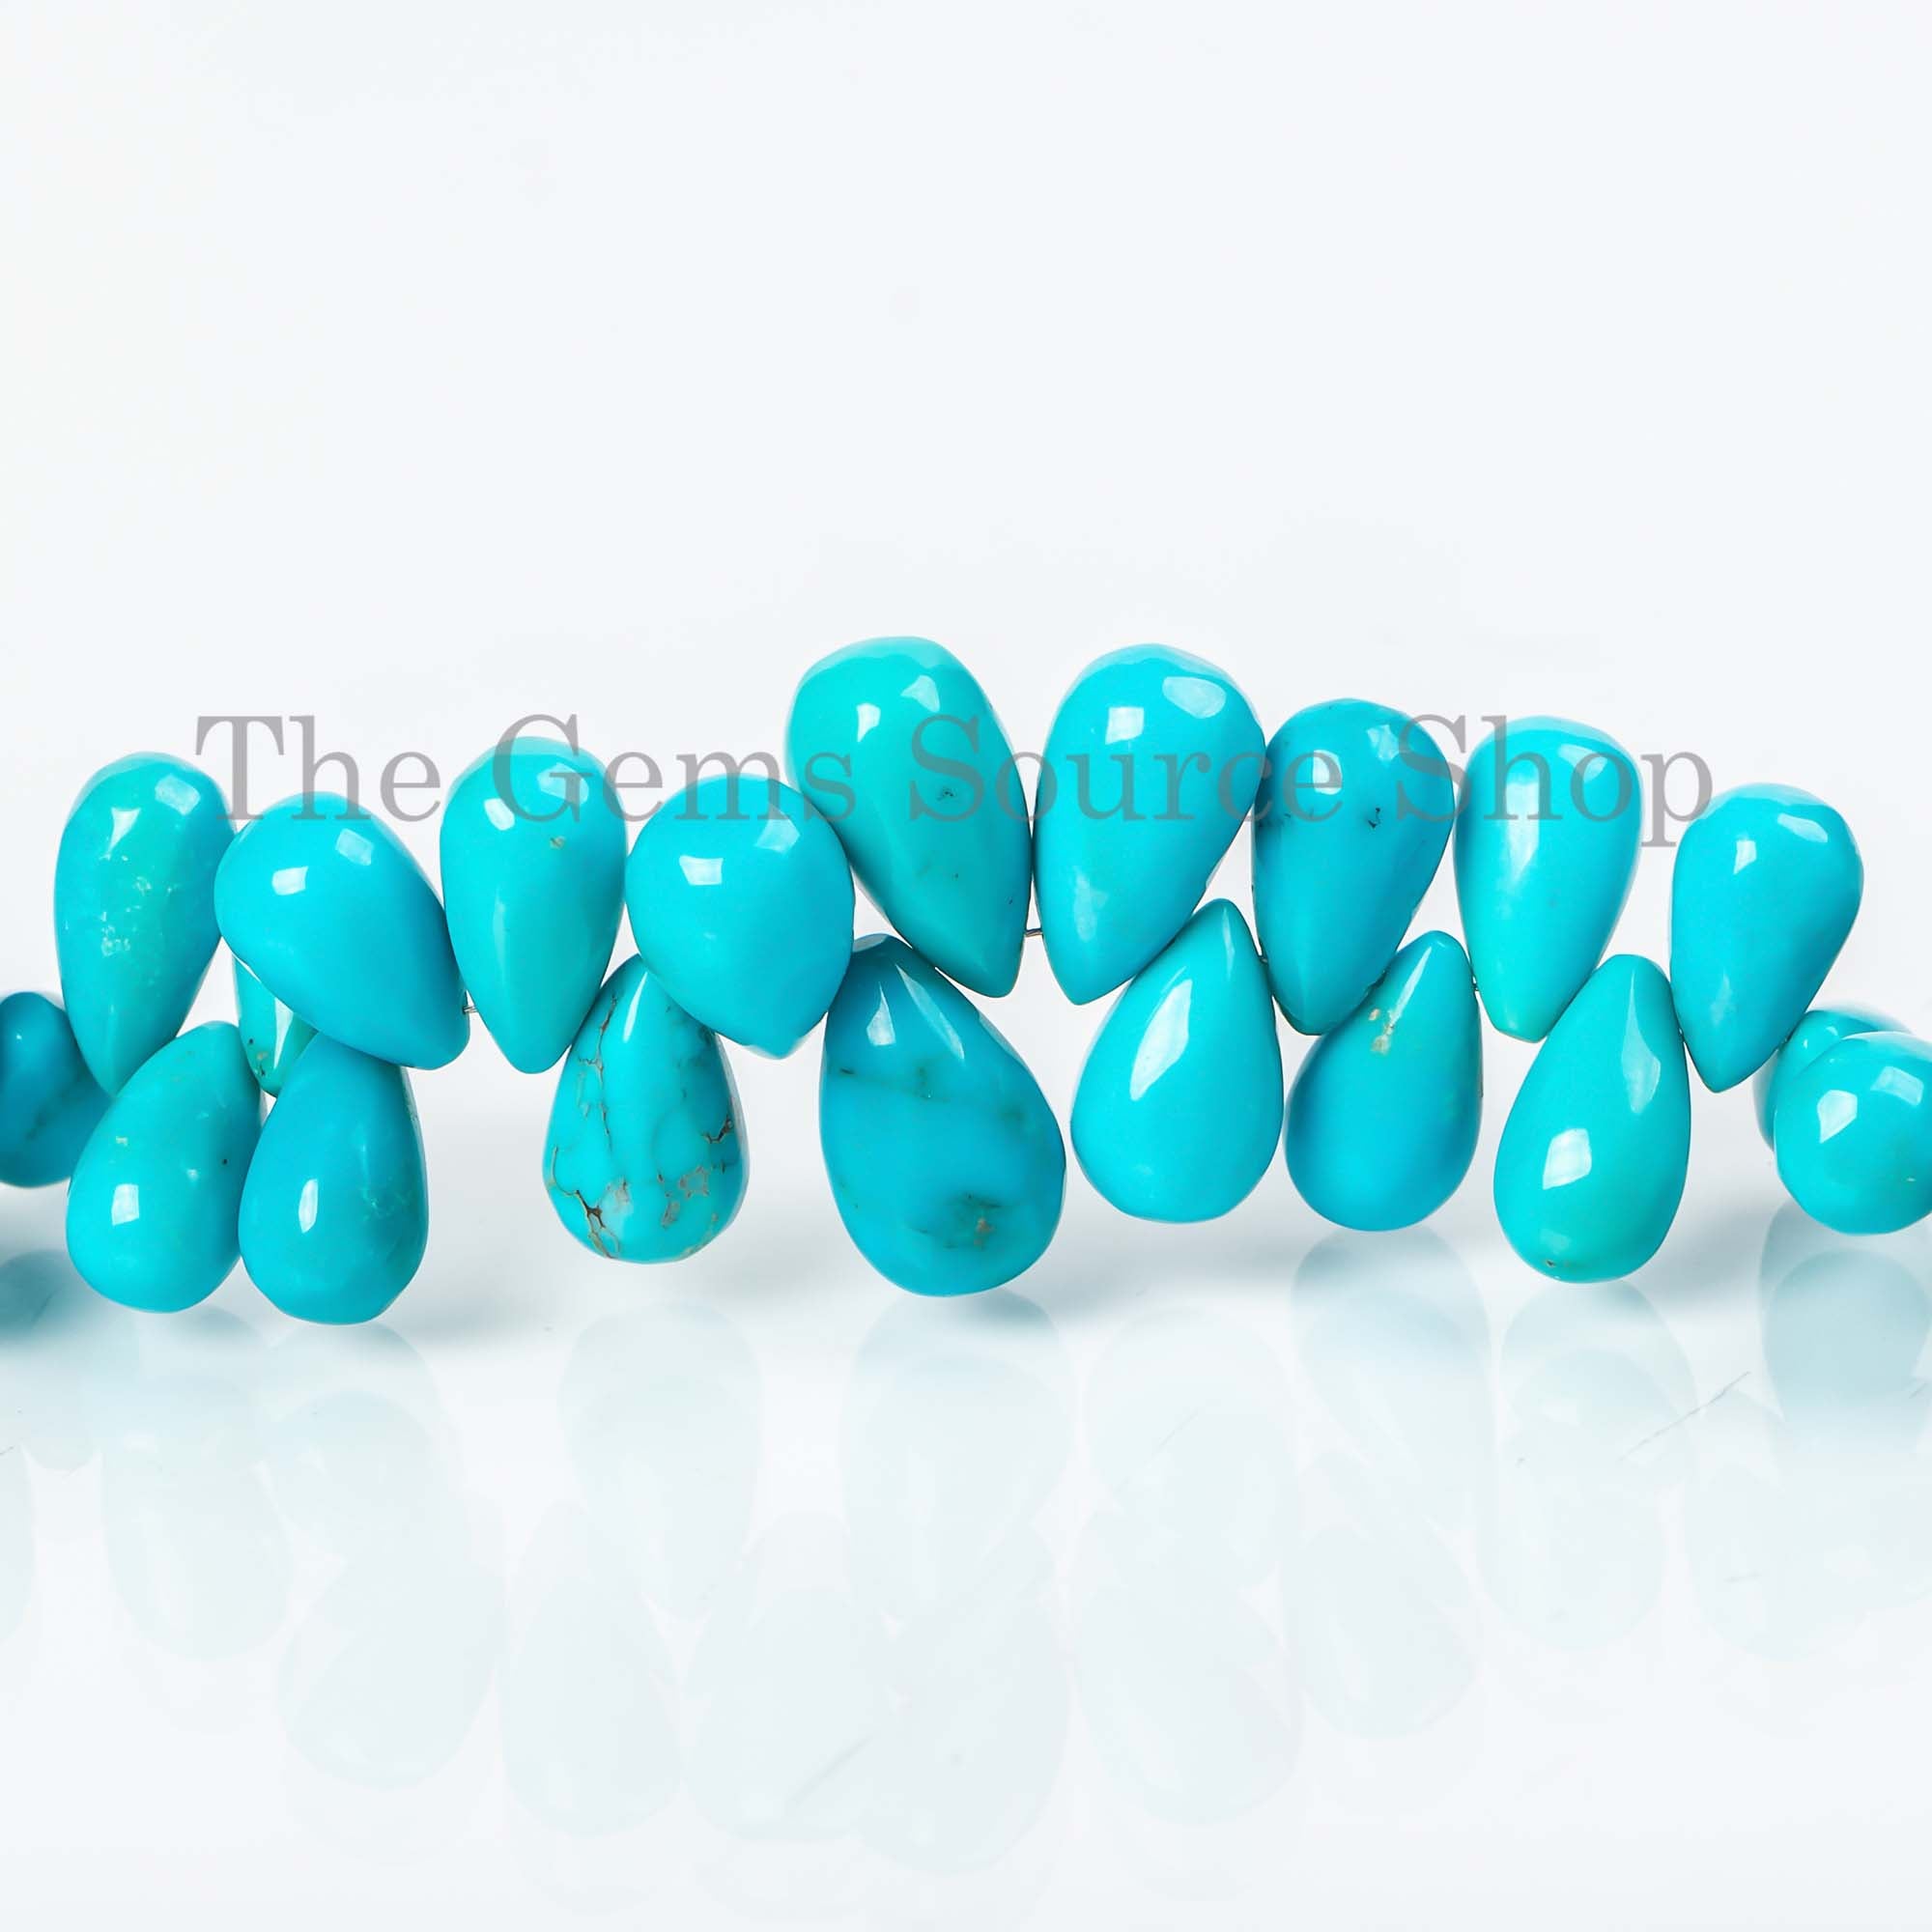 Natural Turquoise Drop Beads, Sleeping Beauty Turquoise Beads, 6x9.50-9x15mm Turquoise Smooth Tear Drop Briolette, Sleeping Beauty Turquoise